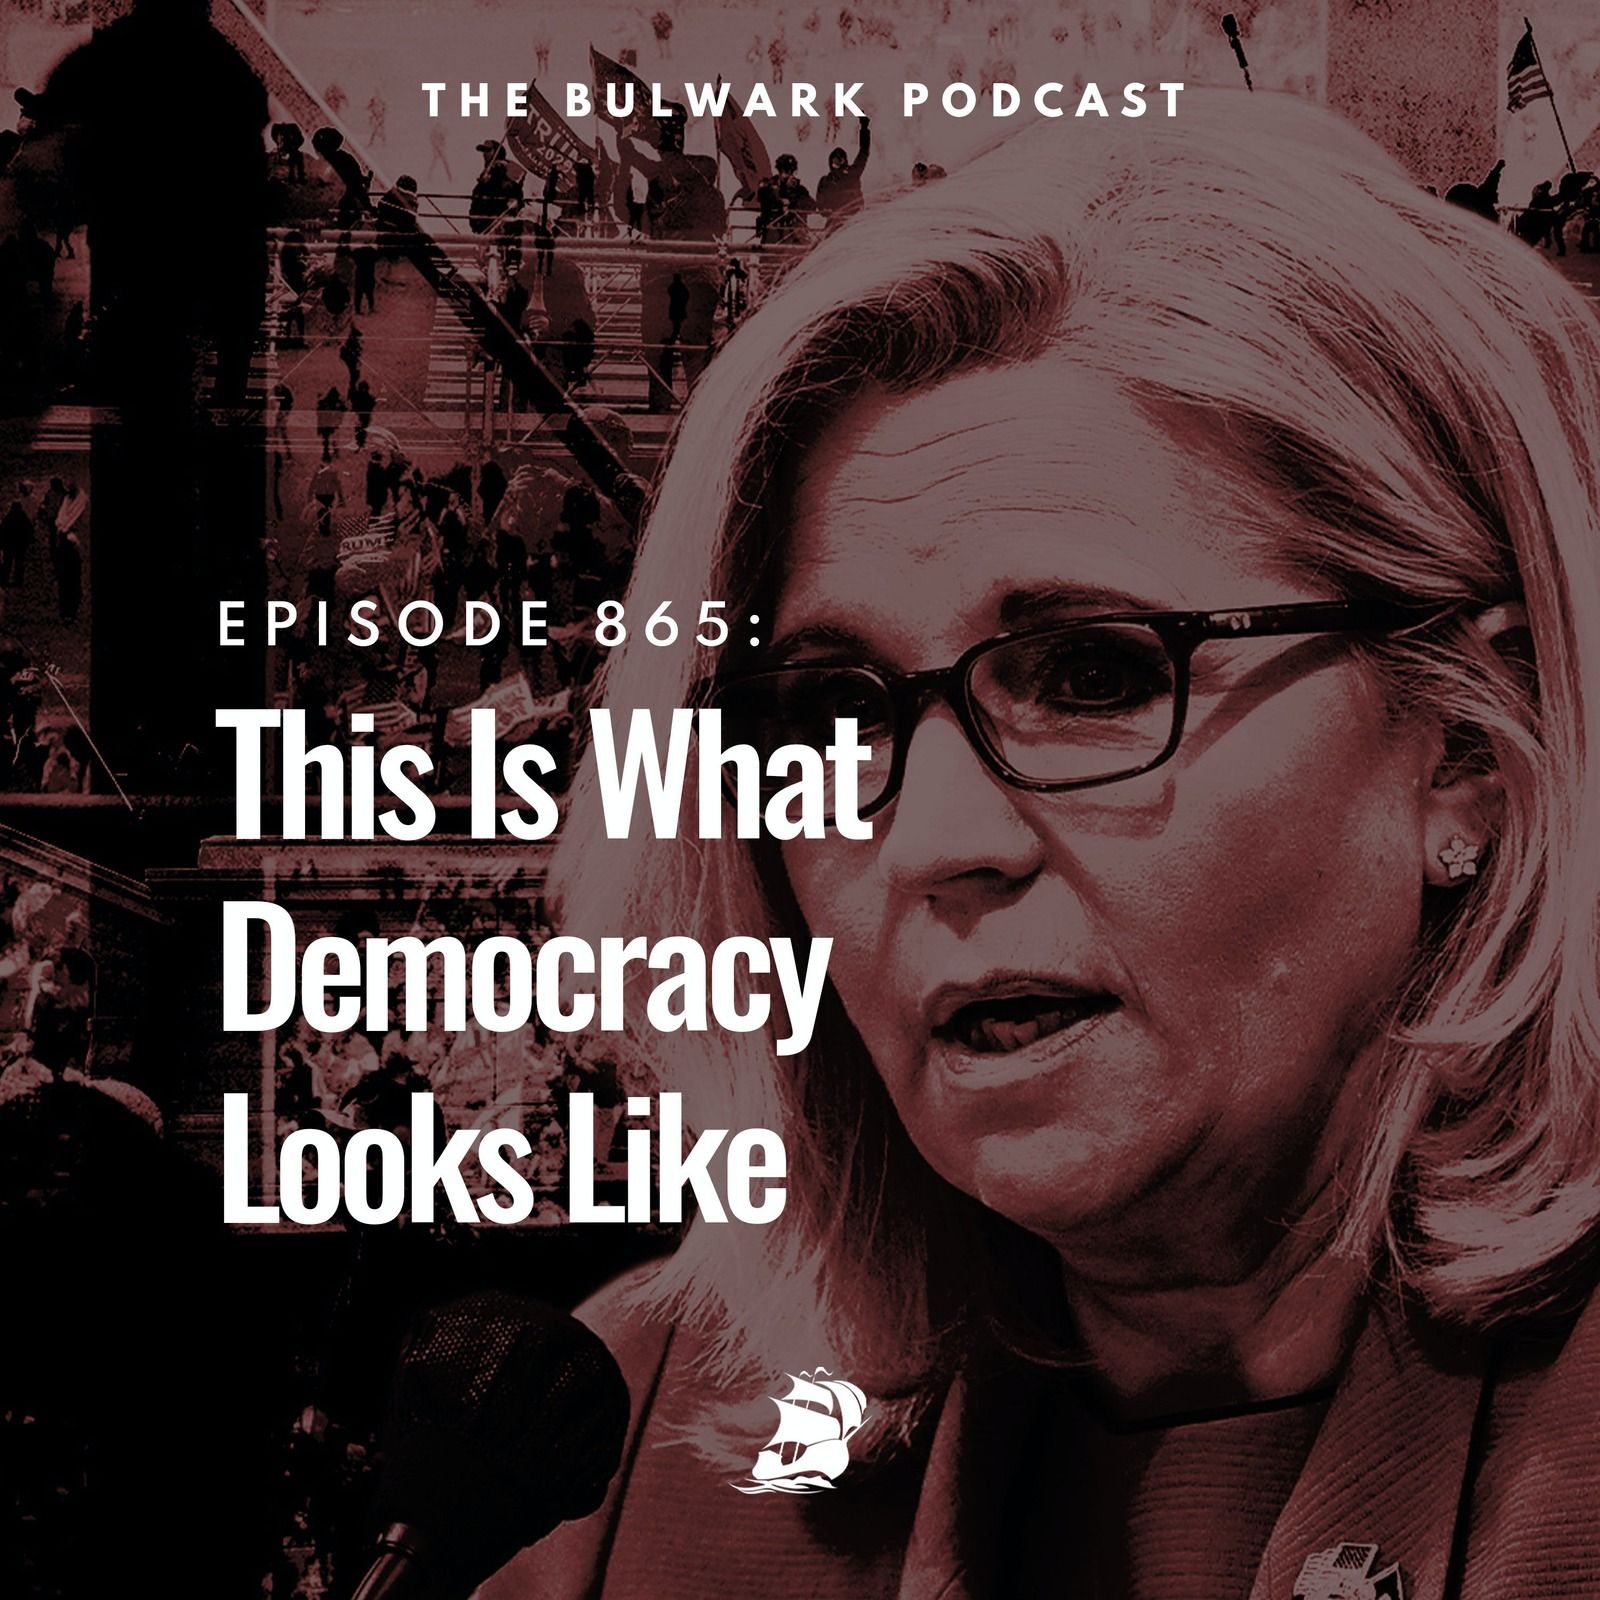 This Is What Democracy Looks Like by The Bulwark Podcast